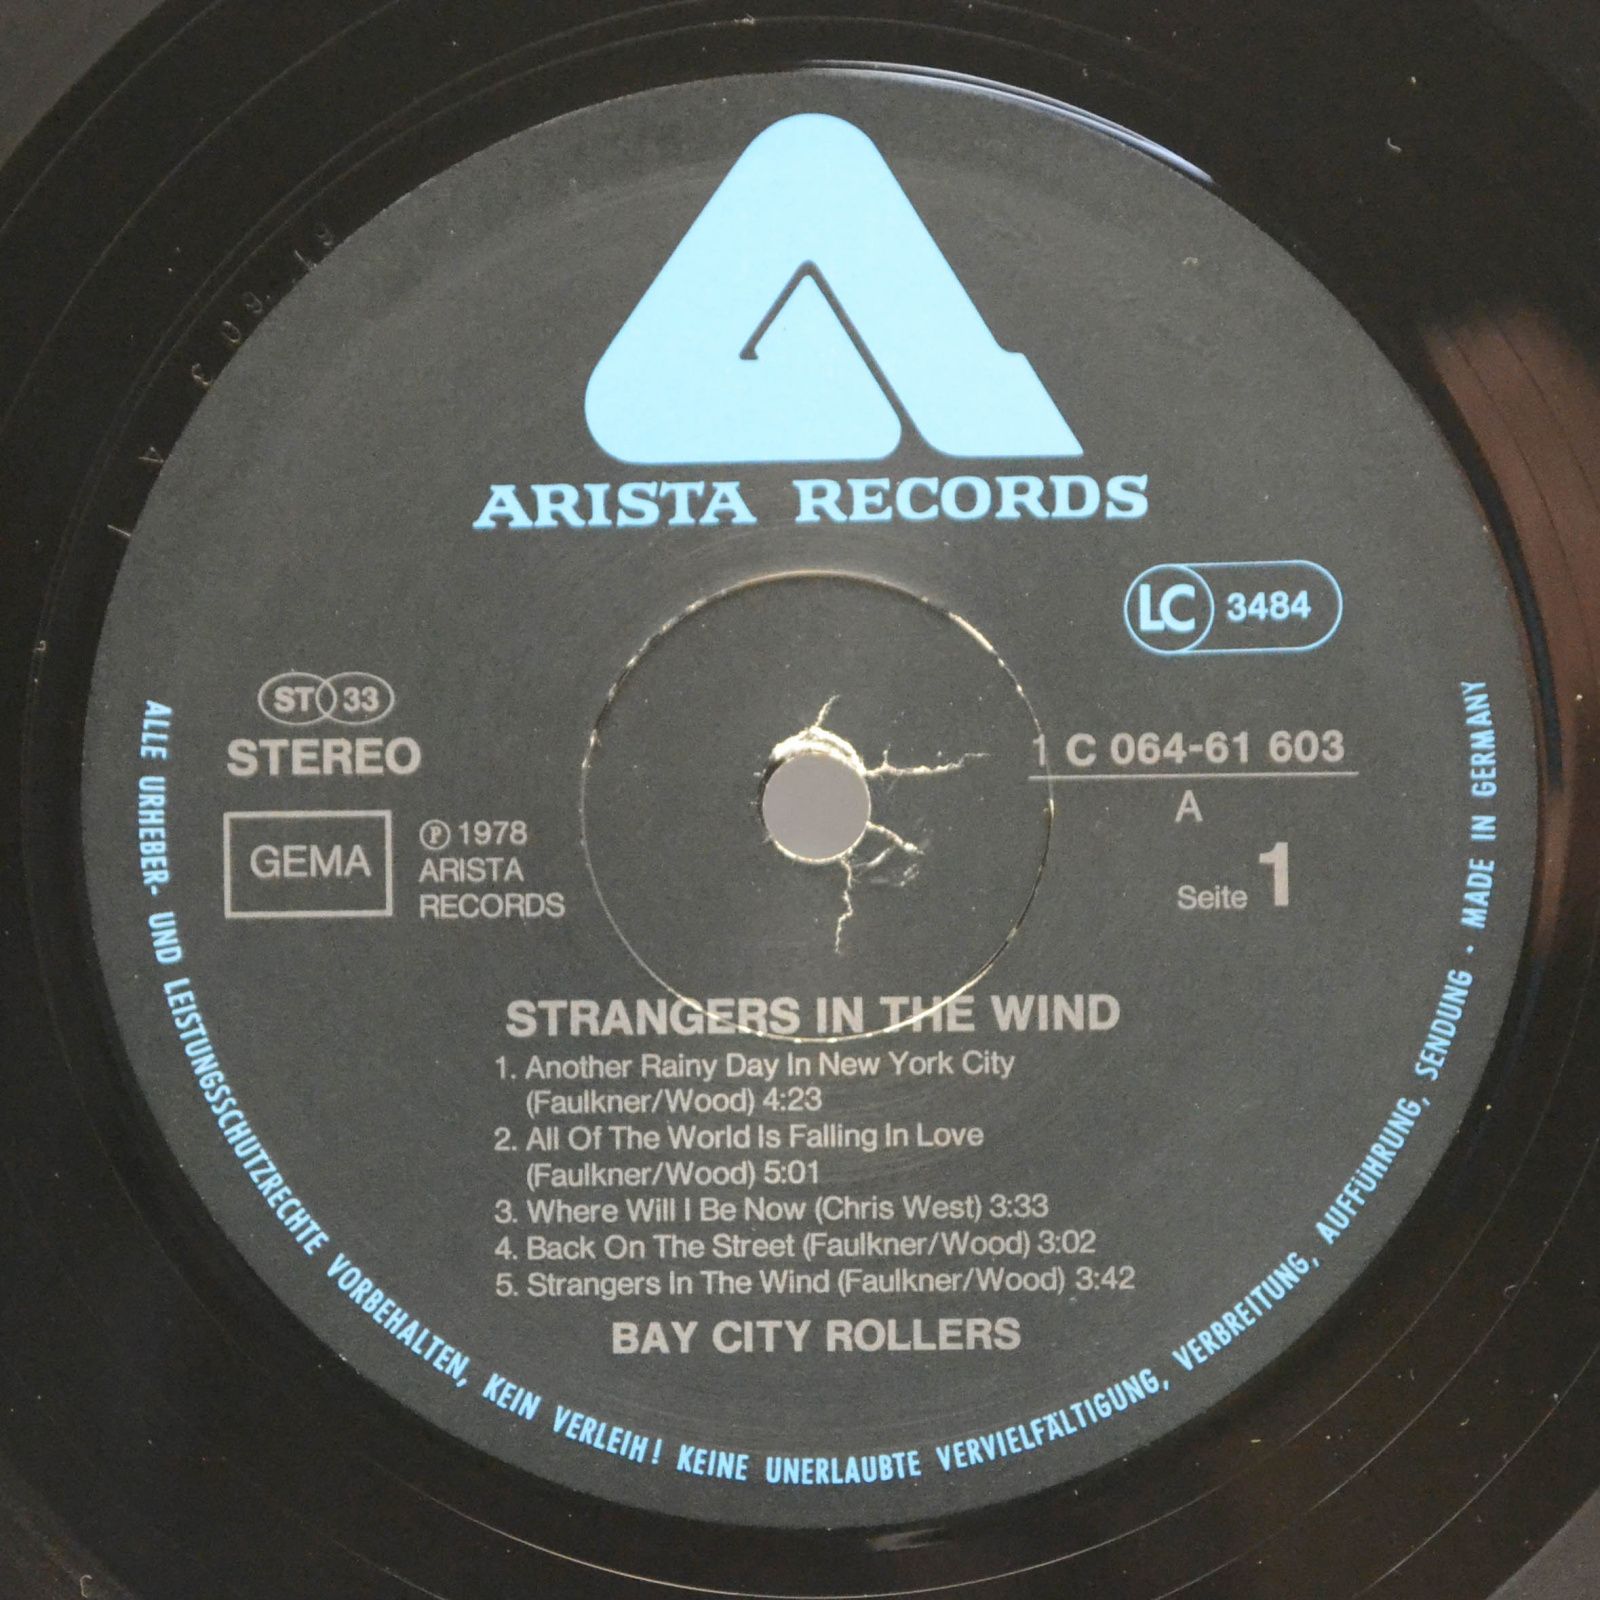 Bay City Rollers — Strangers In The Wind, 1978